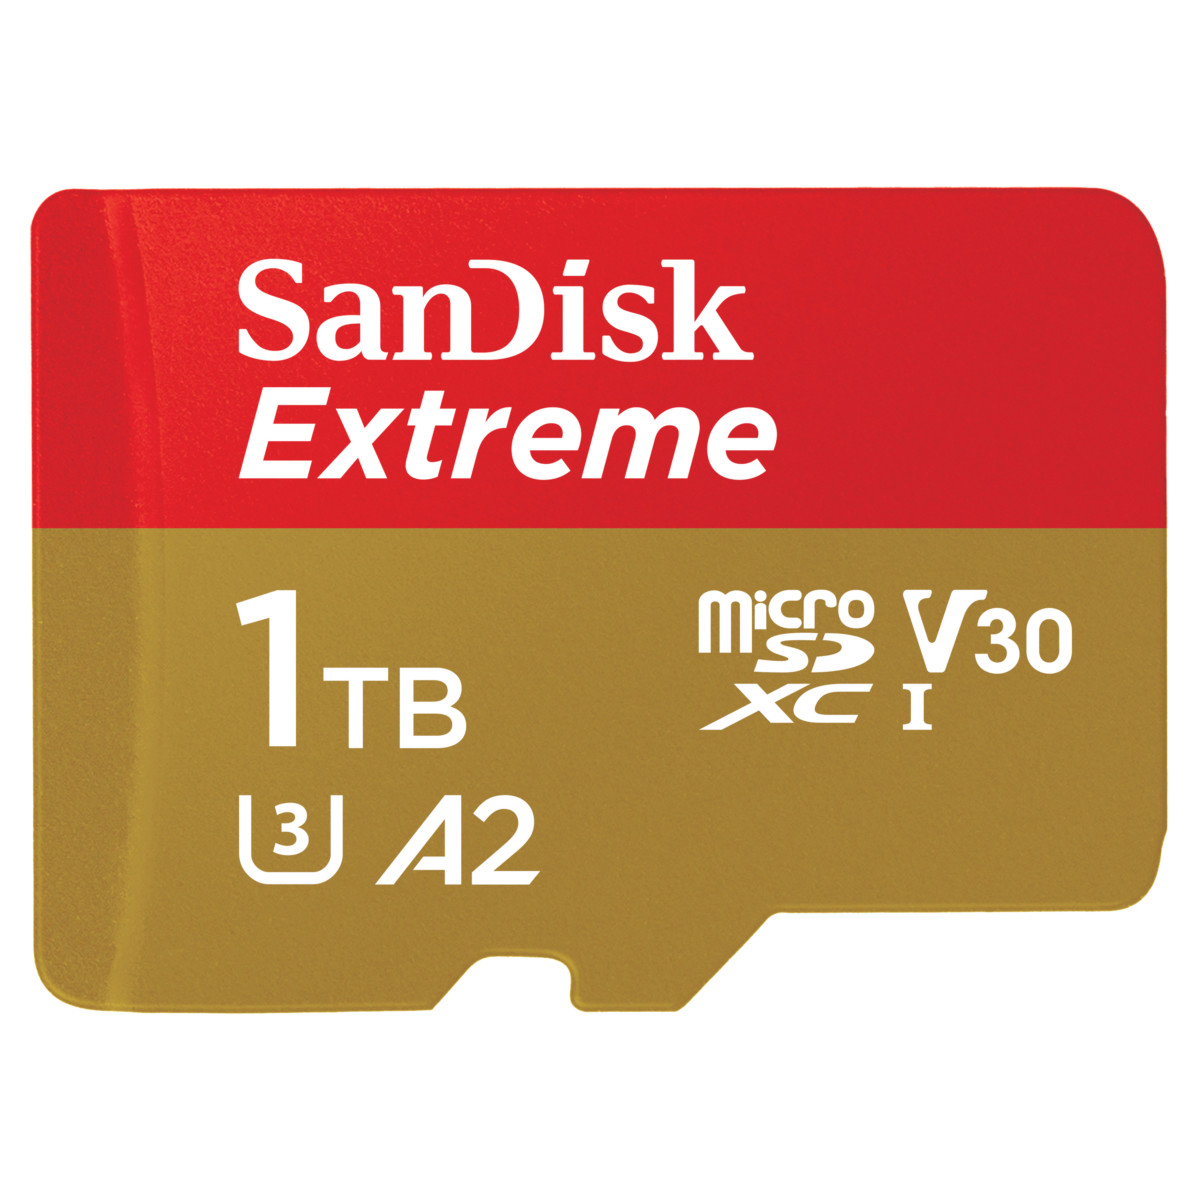 sandisk-1-to-extreme